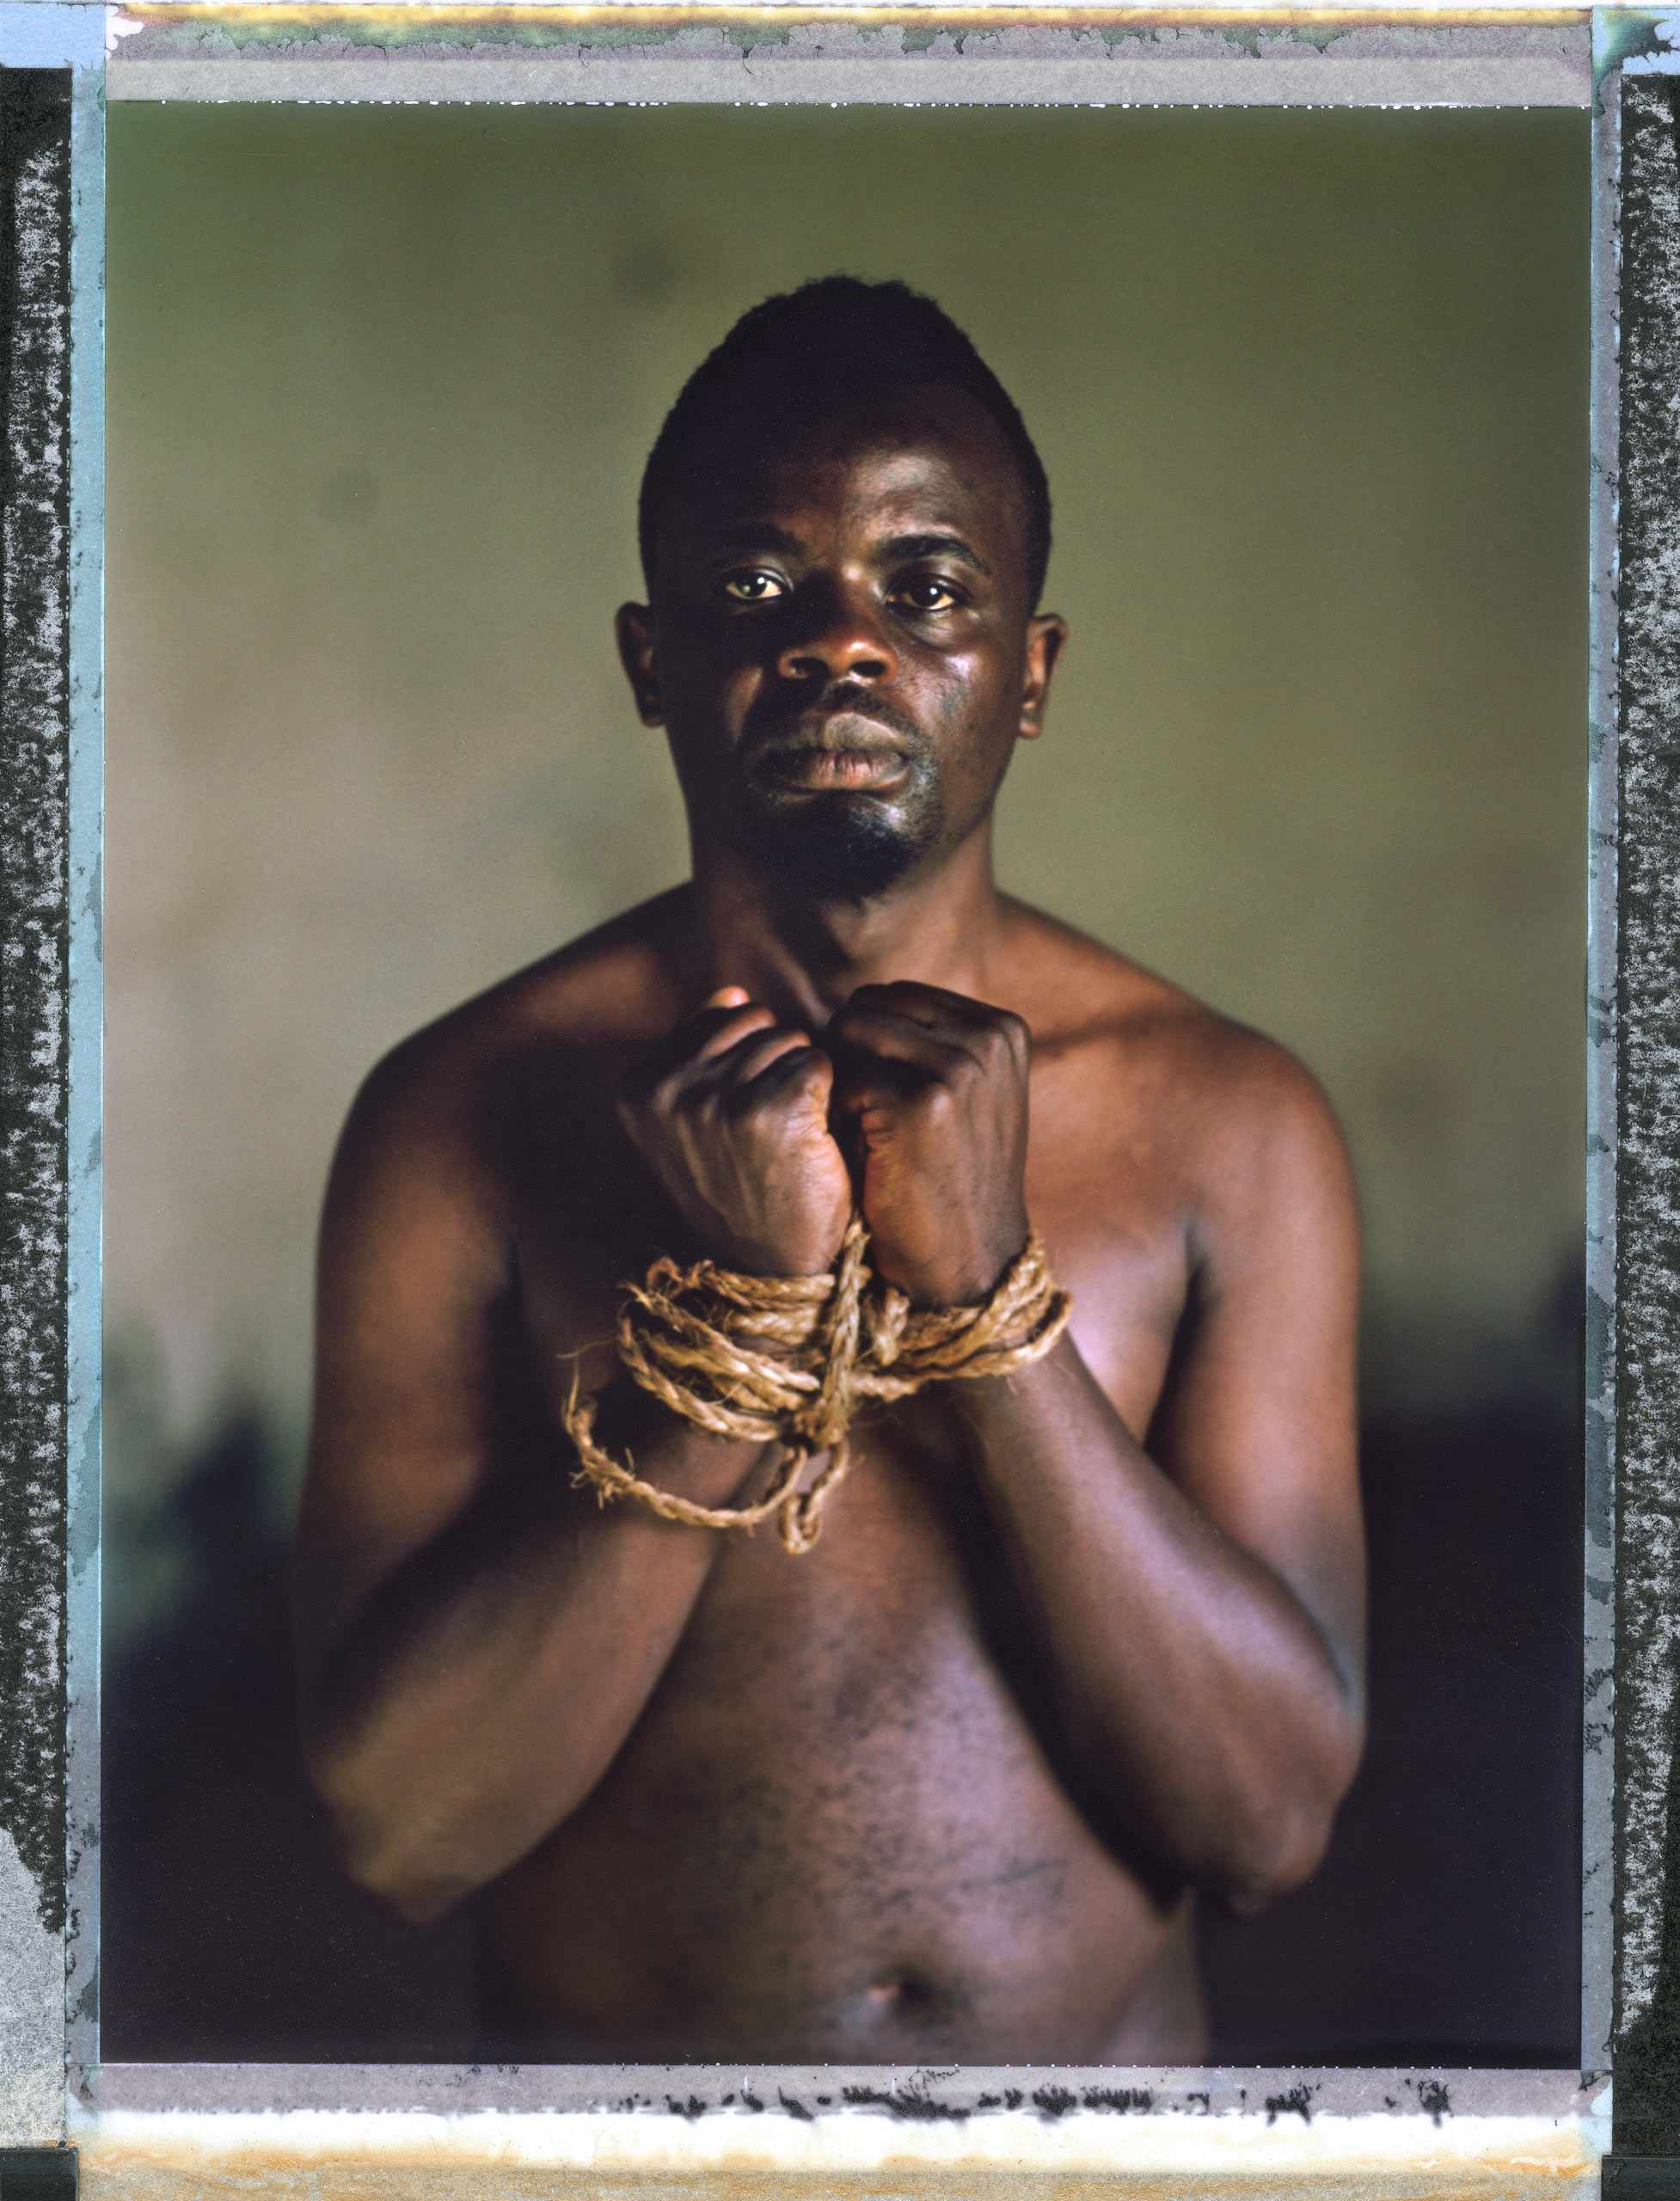 A posed portrait of 26 year old Kamarah Apollo, a gay activist in Uganda. Apollo lists the discrimination he has faced: “In 2010 I was chased from school when they found out that I was in relationship with fellow male student. I was also disowned by my family because of my sex orientation. I left home with no option but to join sex work for survival and fight for our gay and sex workers’ rights because I was working on streets. I was also arrested several times because police officers thought I was promoting homosexual acts in Uganda. I have been tortured several times by homophobic people and police officers by tying me with ropes and being beaten, pierced by soft pins, nicknamed, a lot of psychological torture by local leaders and police. I can’t forget when I was raped in the police cell by prisoners, after all that I decided to start an organization with some campus students. An msm organization called kampuss liberty Uganda. During the petitioning of the anti-homosexuality act I appeared on local televisions so much and it became hard to me to a permanent place to stay because the majorities are homophobic. I also appeared in local newspapers as a promoter of homosexuals so right now it’s hard for me to get a safe place to rent yet I am not working. I was fired from work because I am gay.” Uganda, September 2014.  While many countries around the world are legally recognizing same-sex relationships, individuals in nearly 80 countries face criminal sanctions for private consensual relations with another adult of the same sex. Violence and discrimination based on sexual orientation or gender expression is even more widespread. Africa is becoming the worst continent for Lesbian, Gay, Bi-sexual, Transgender, Queer, Inter-sex (LGBTQI) individuals. More than two thirds of African countries have laws criminalizing consensual same-sex acts. In some, homosexuality is punishable by death. In Nigeria new homophobic laws introduced in 2013 led to dramatic increase